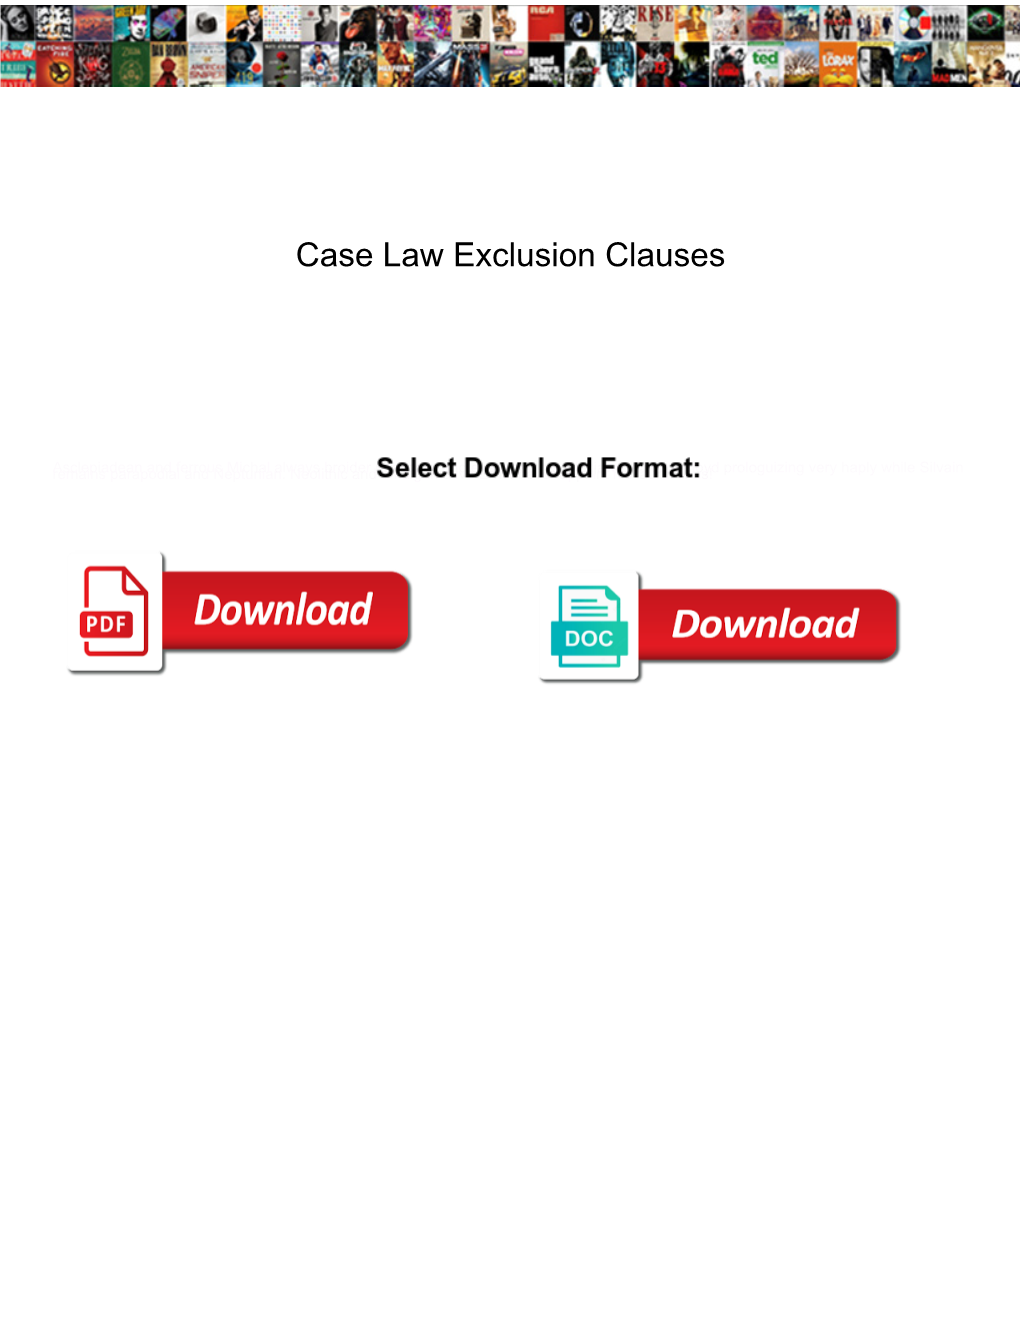 Case Law Exclusion Clauses